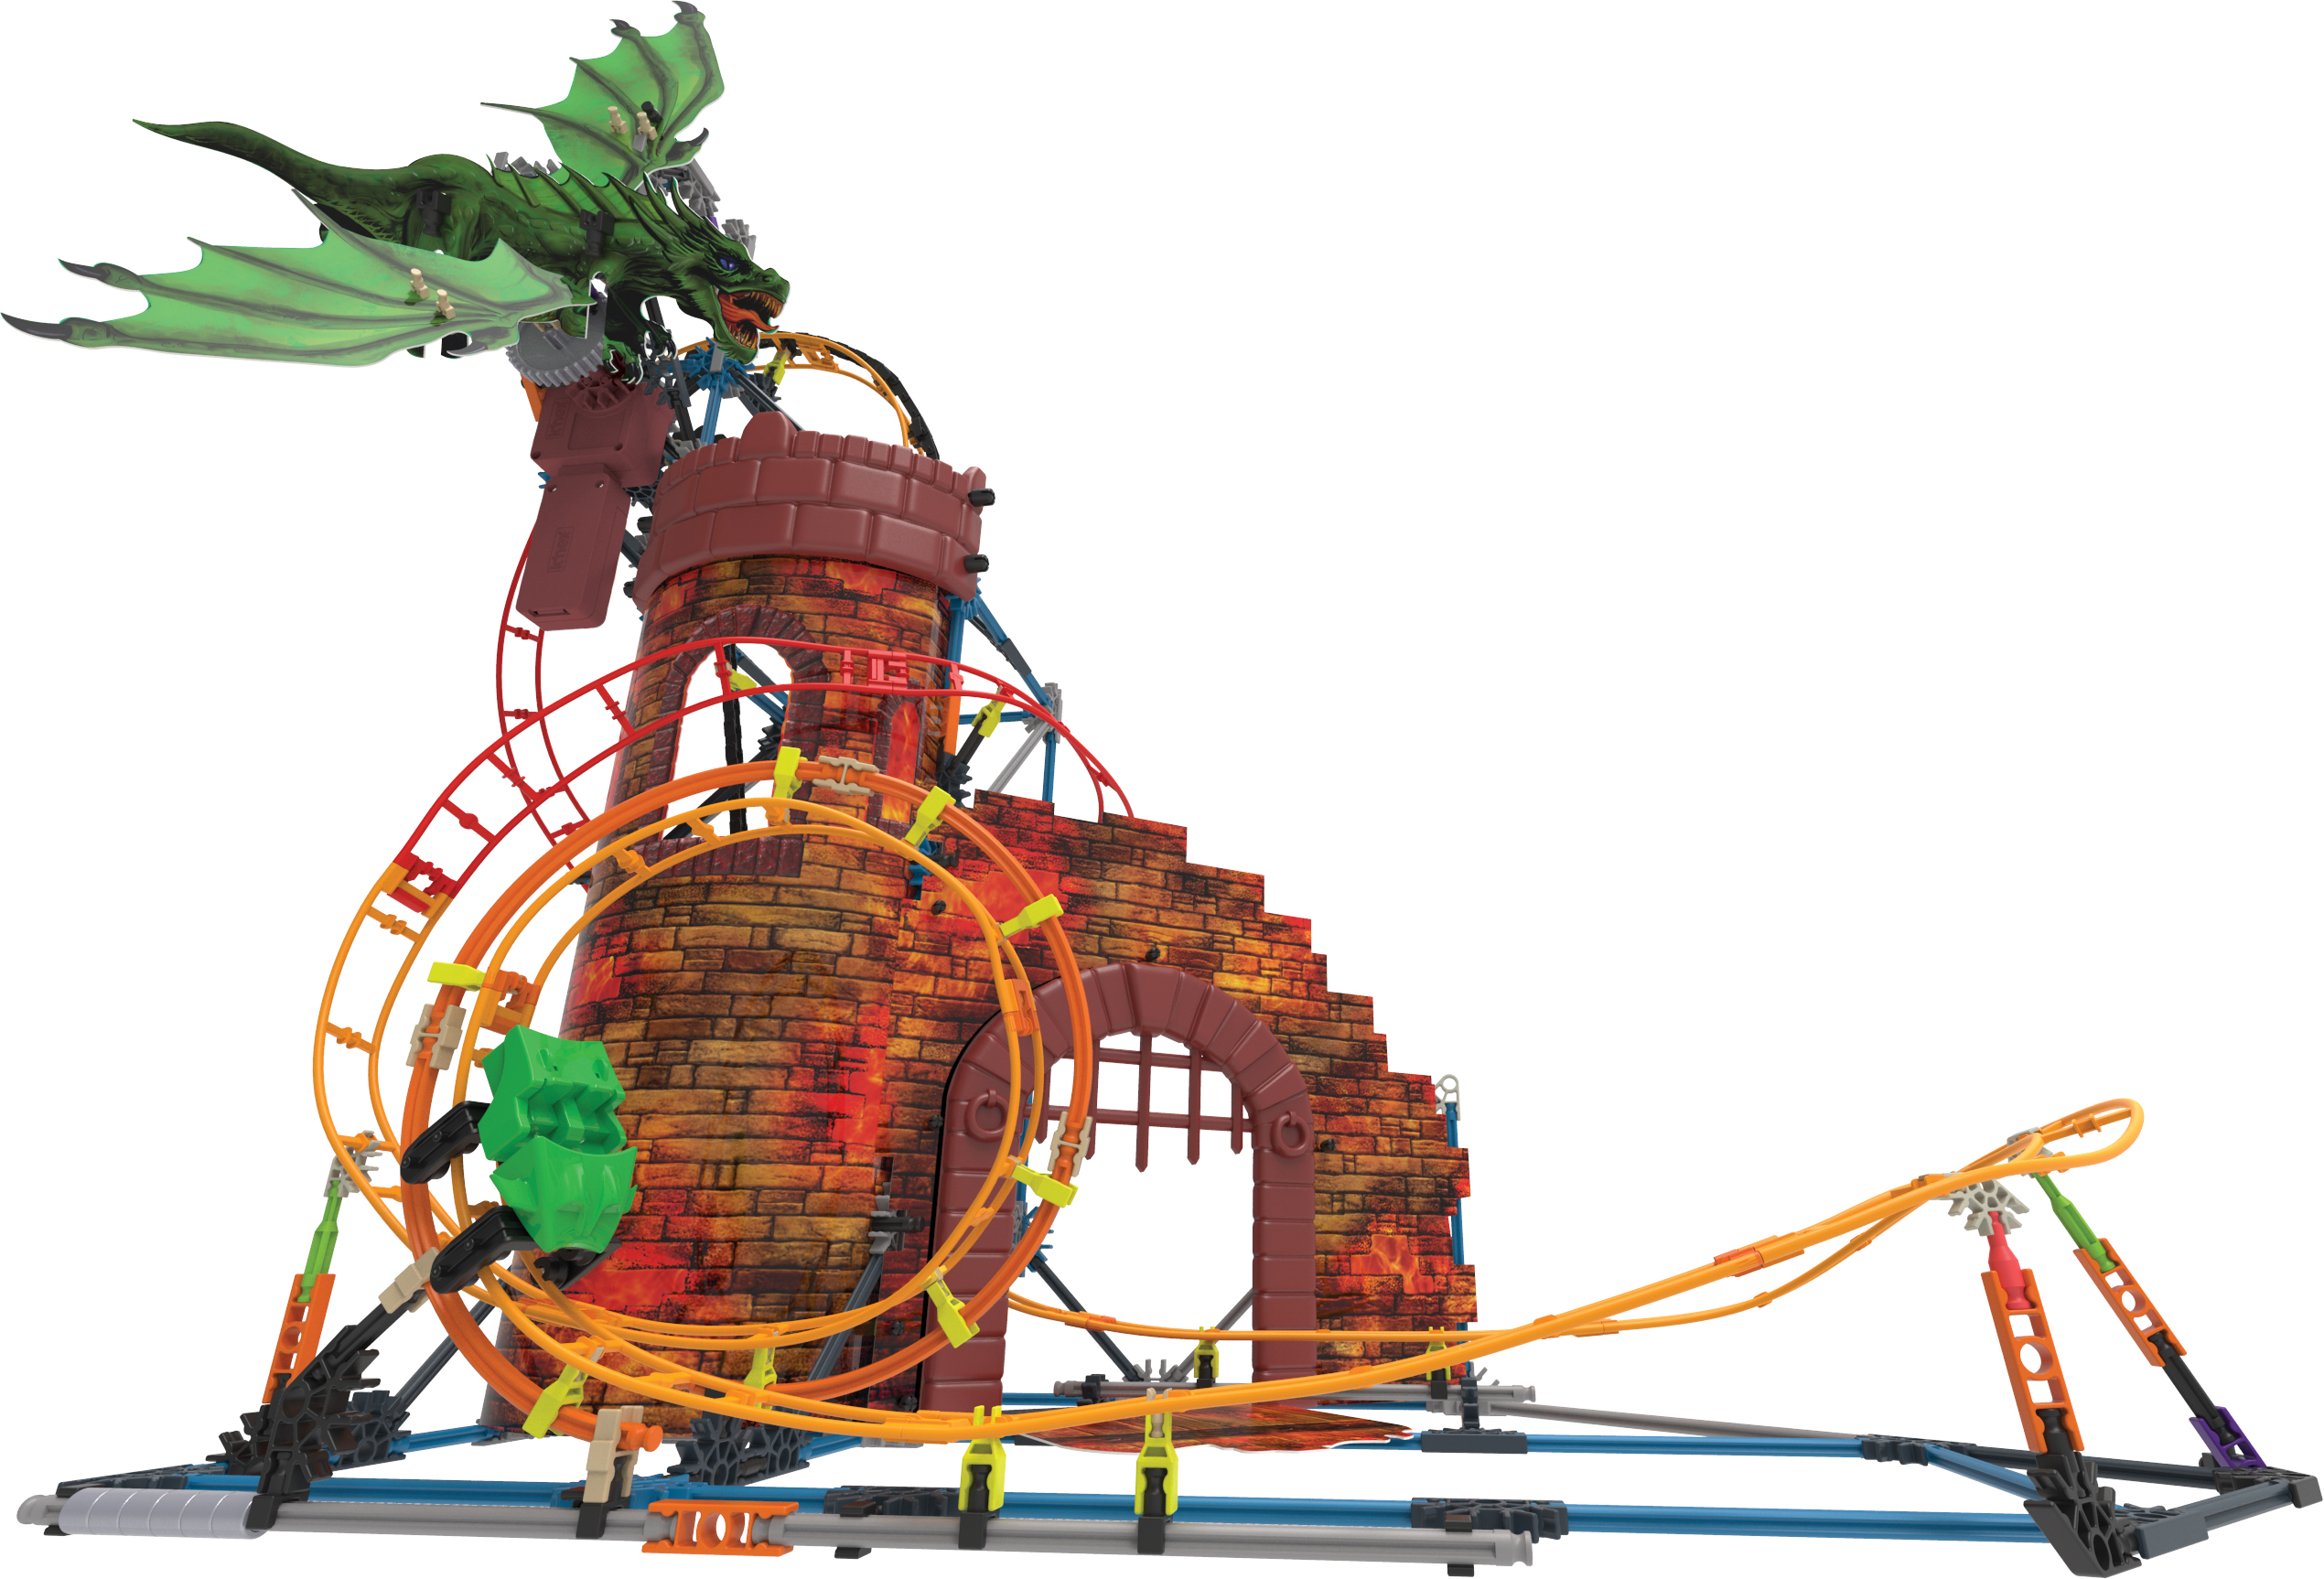 K'NEX Dragon's Revenge Thrill Coaster - 578 Parts - Roller Coaster Toy - Ages 9 and up - image 2 of 11